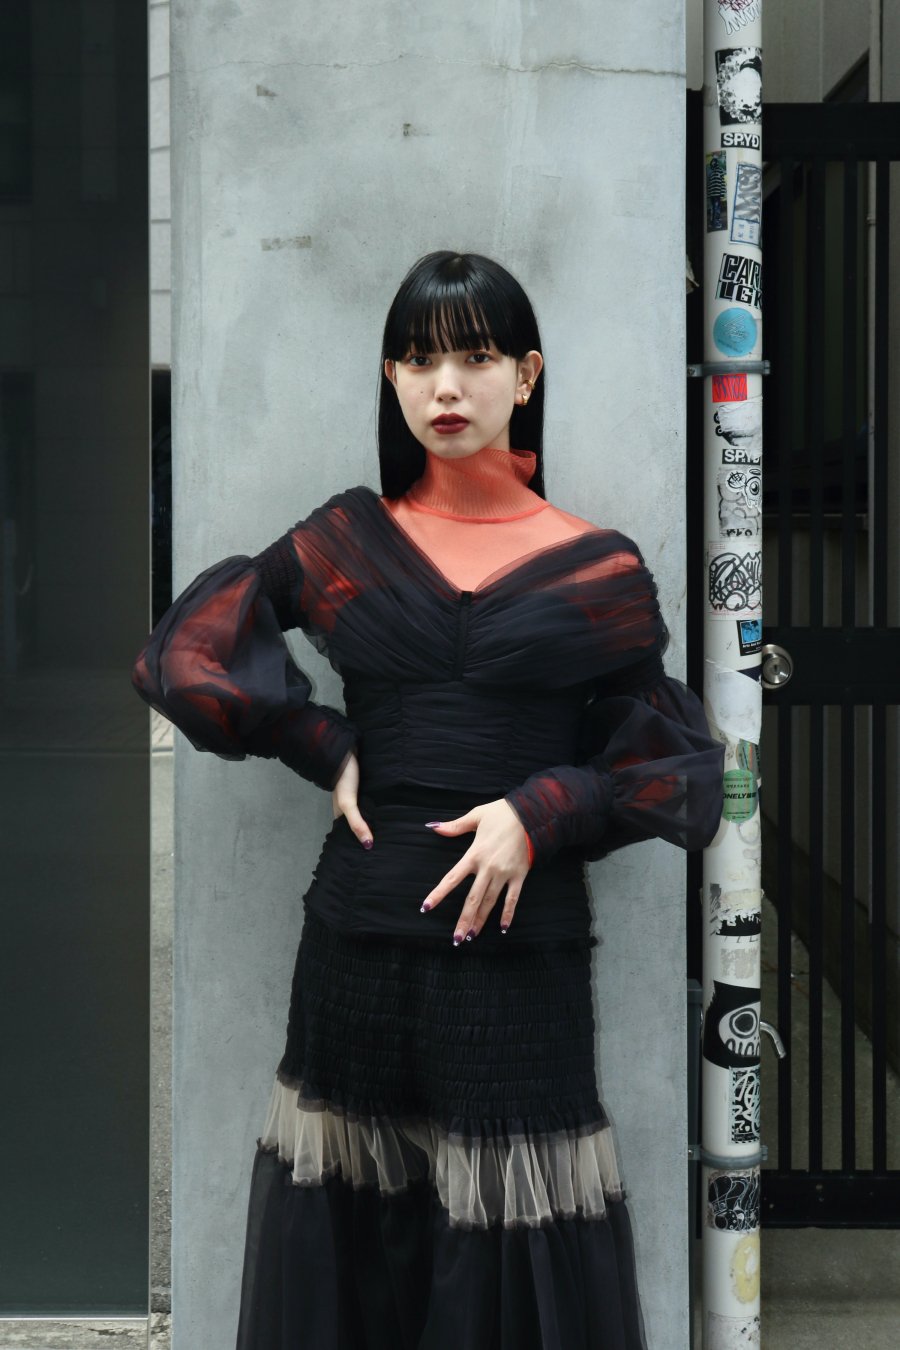 FETICO（フェティコ）のMUTTON SLEEVE TULLE BLOUSE BLACKの通販サイト ...